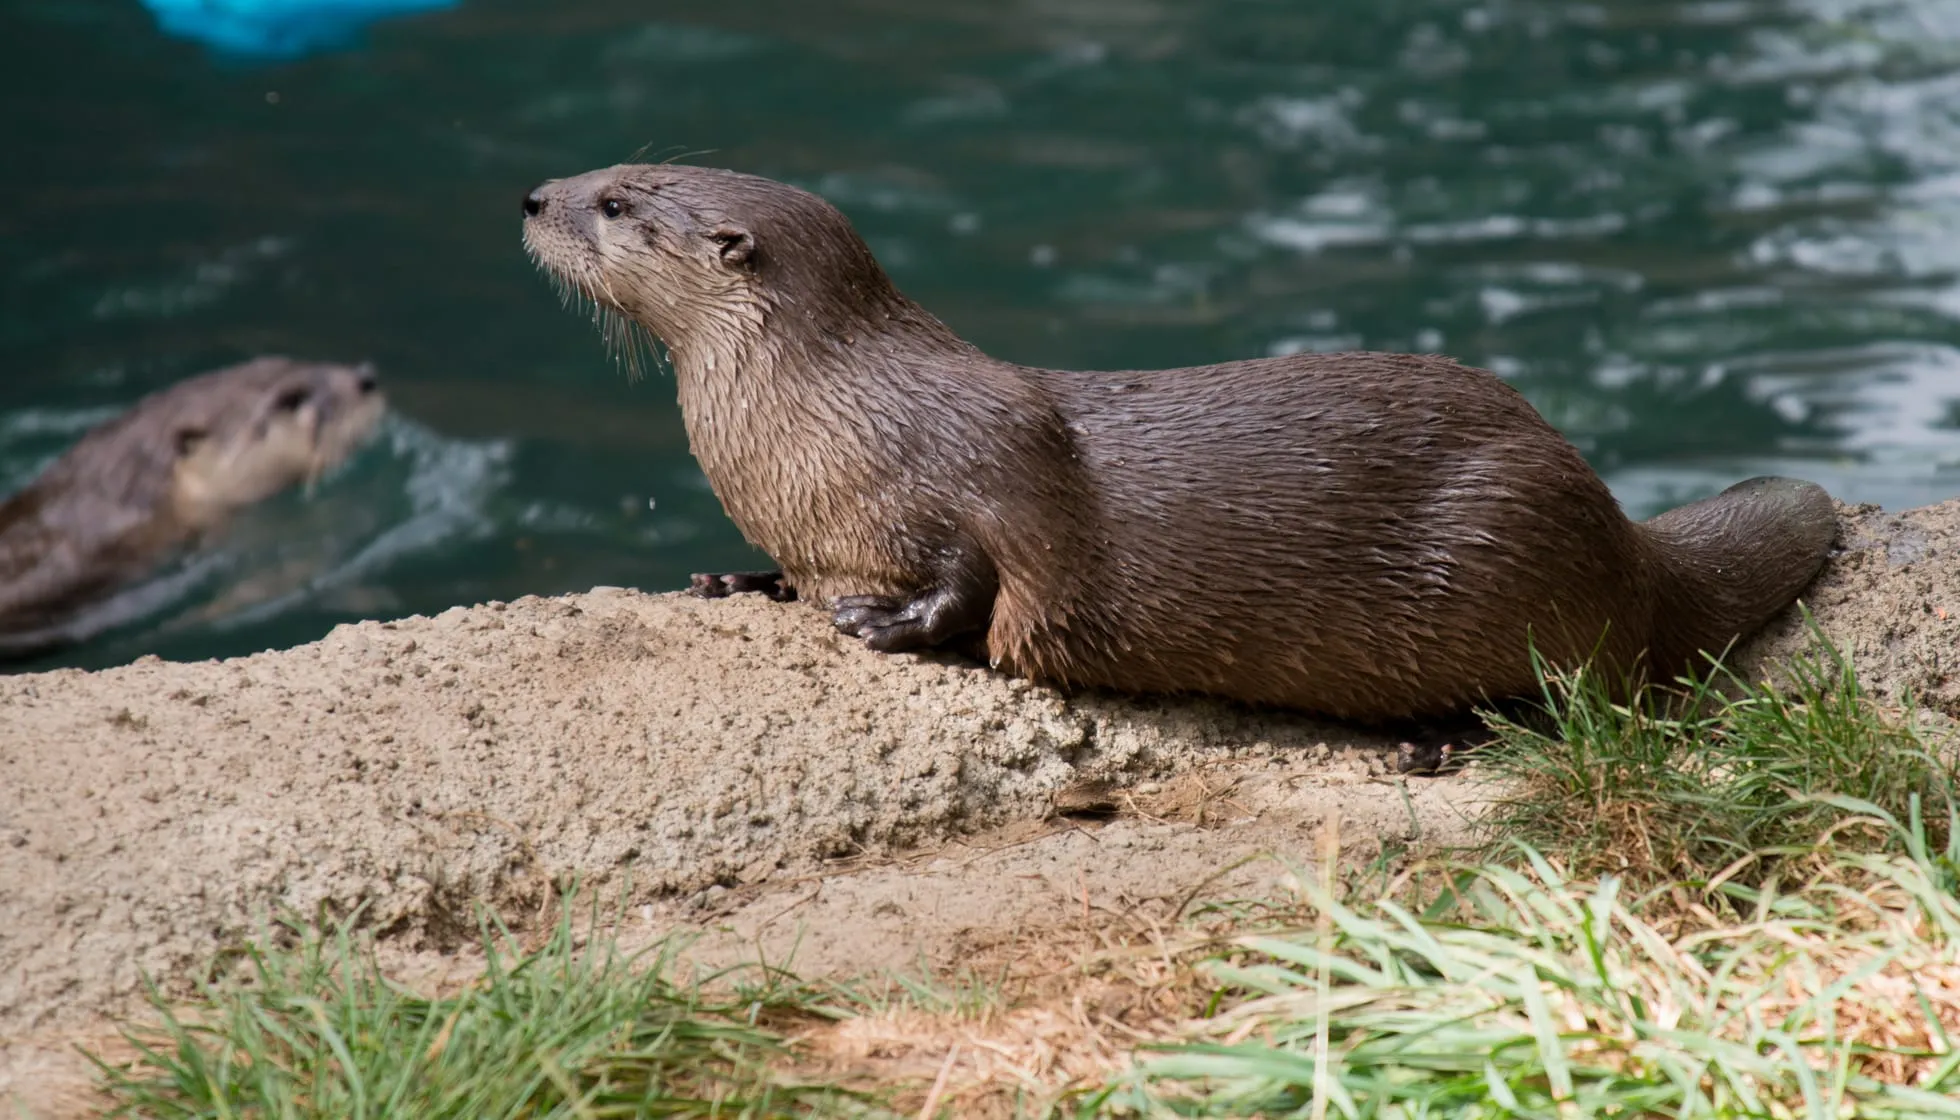 North American River Otter near water